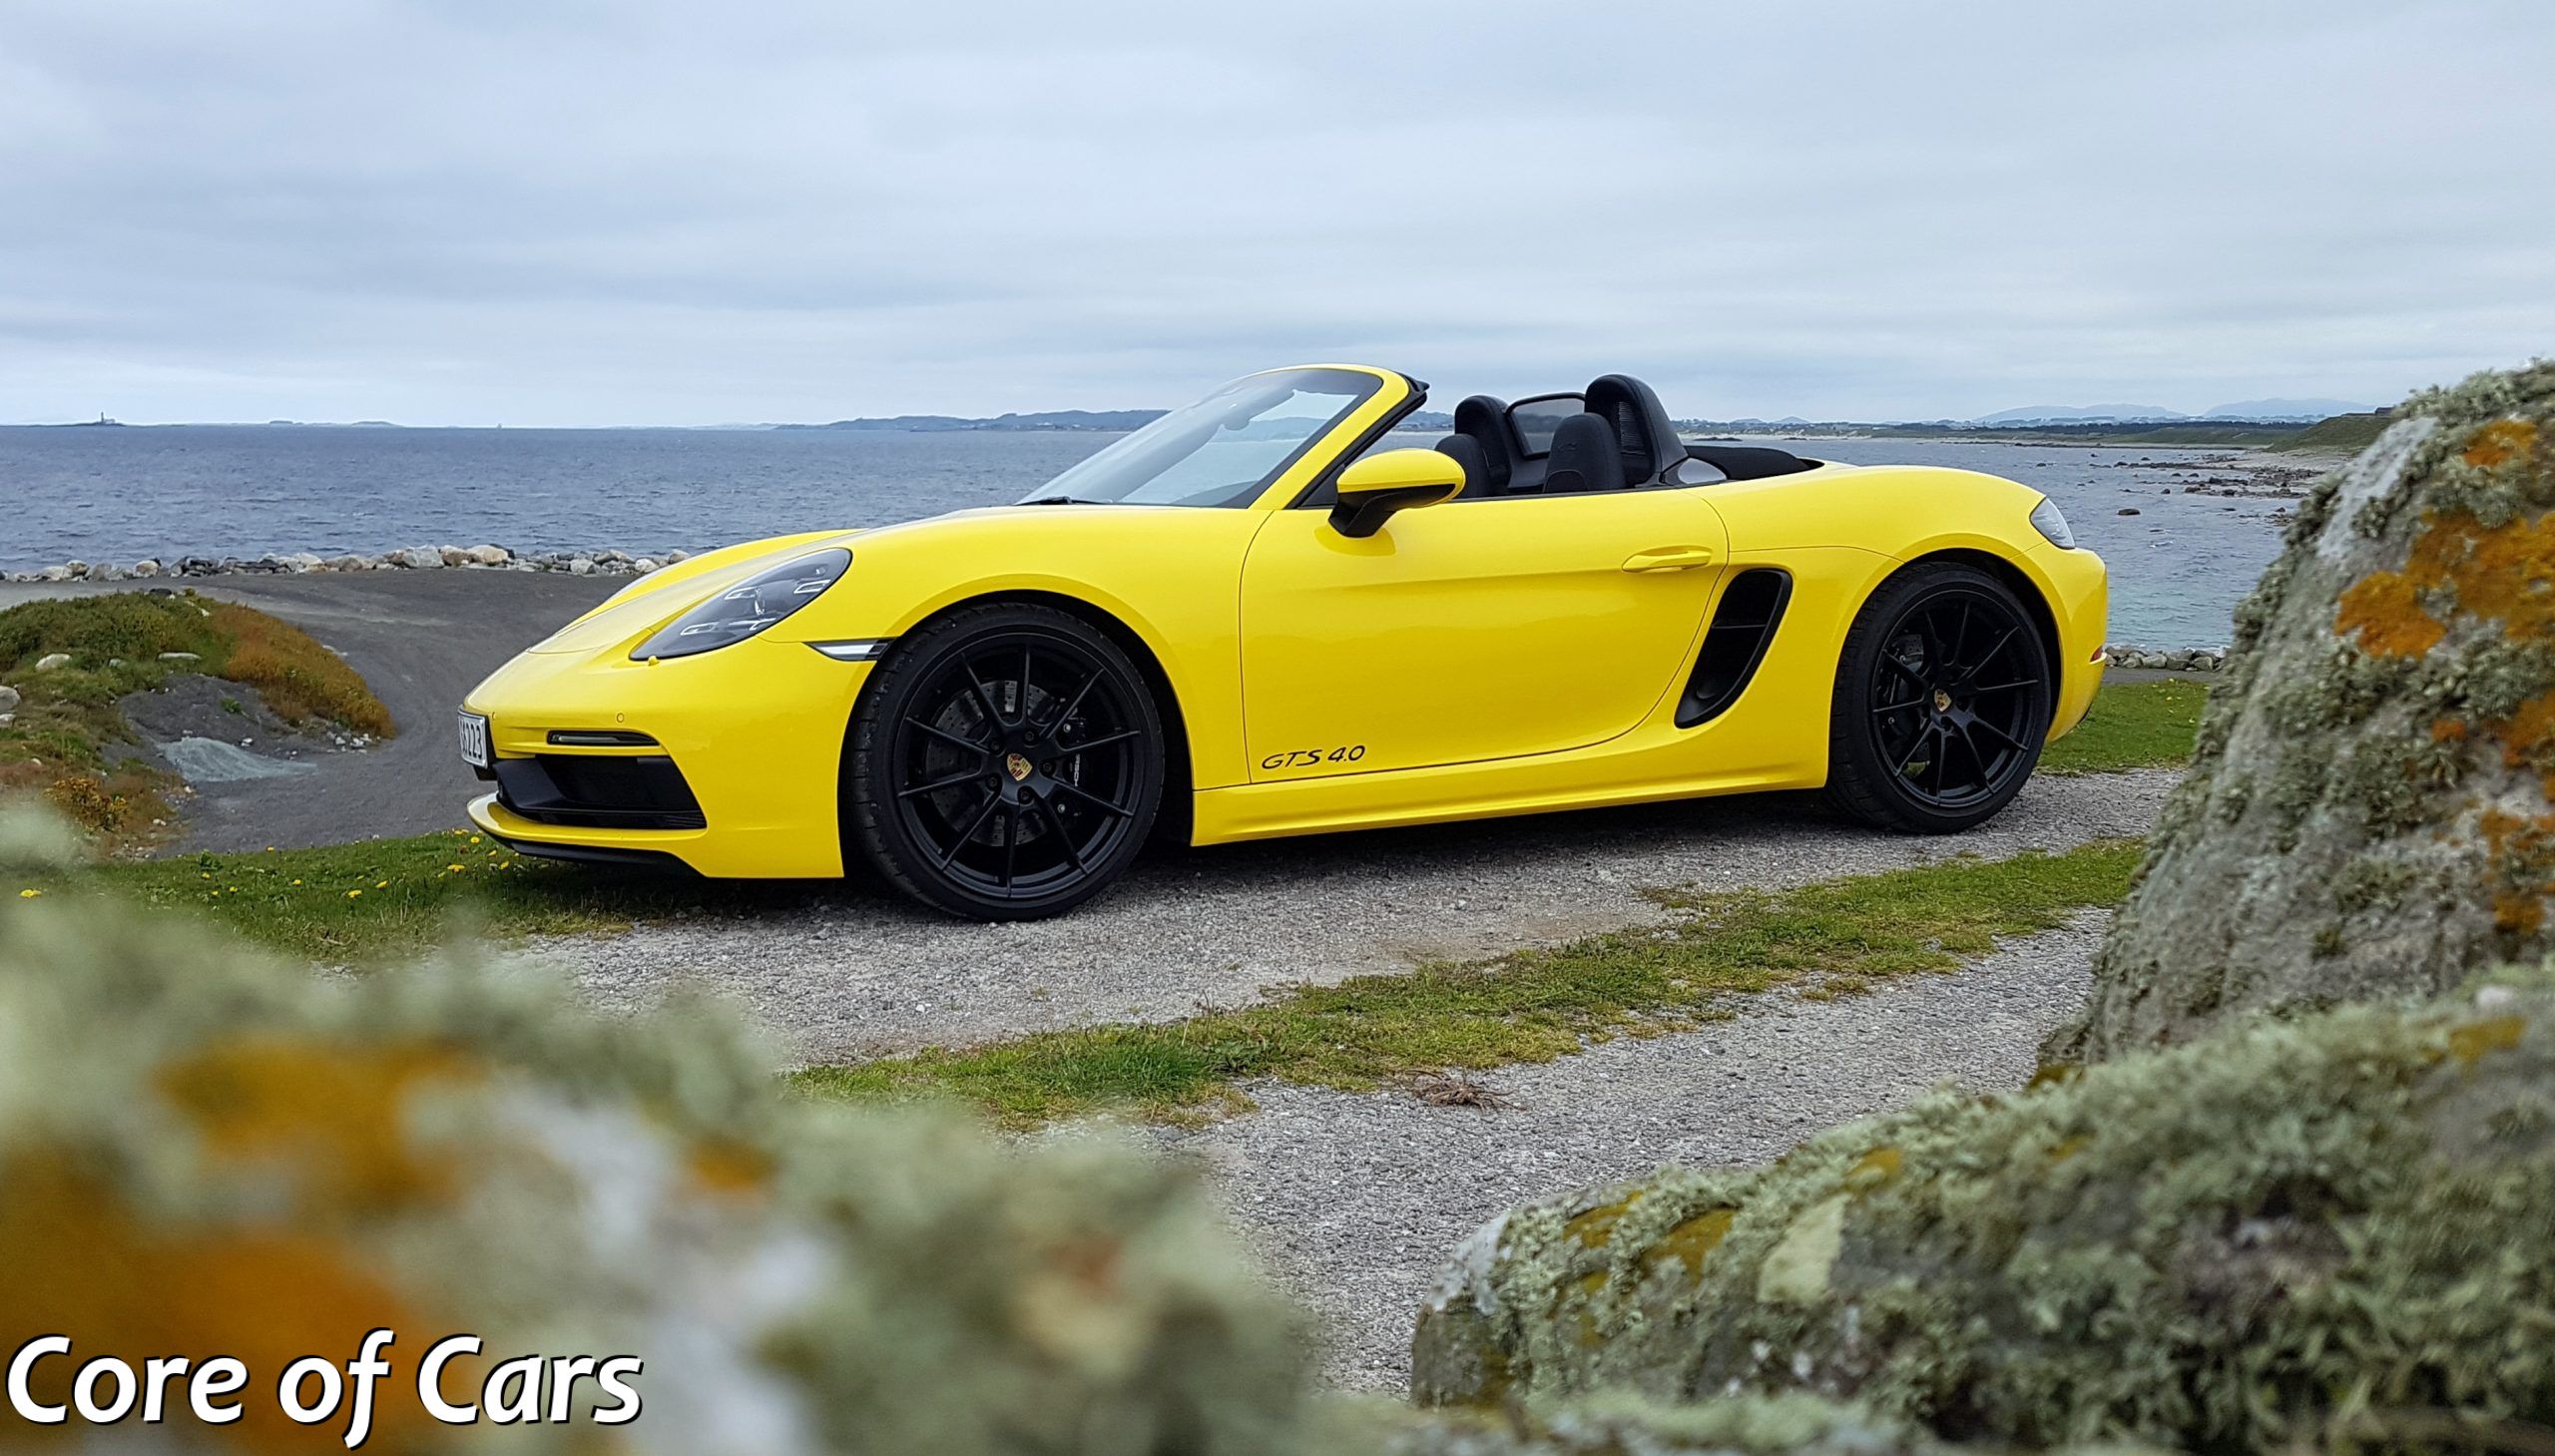 Boxing Above Its Class Porsche 718 Boxster Gts 4 0 Core Of Cars